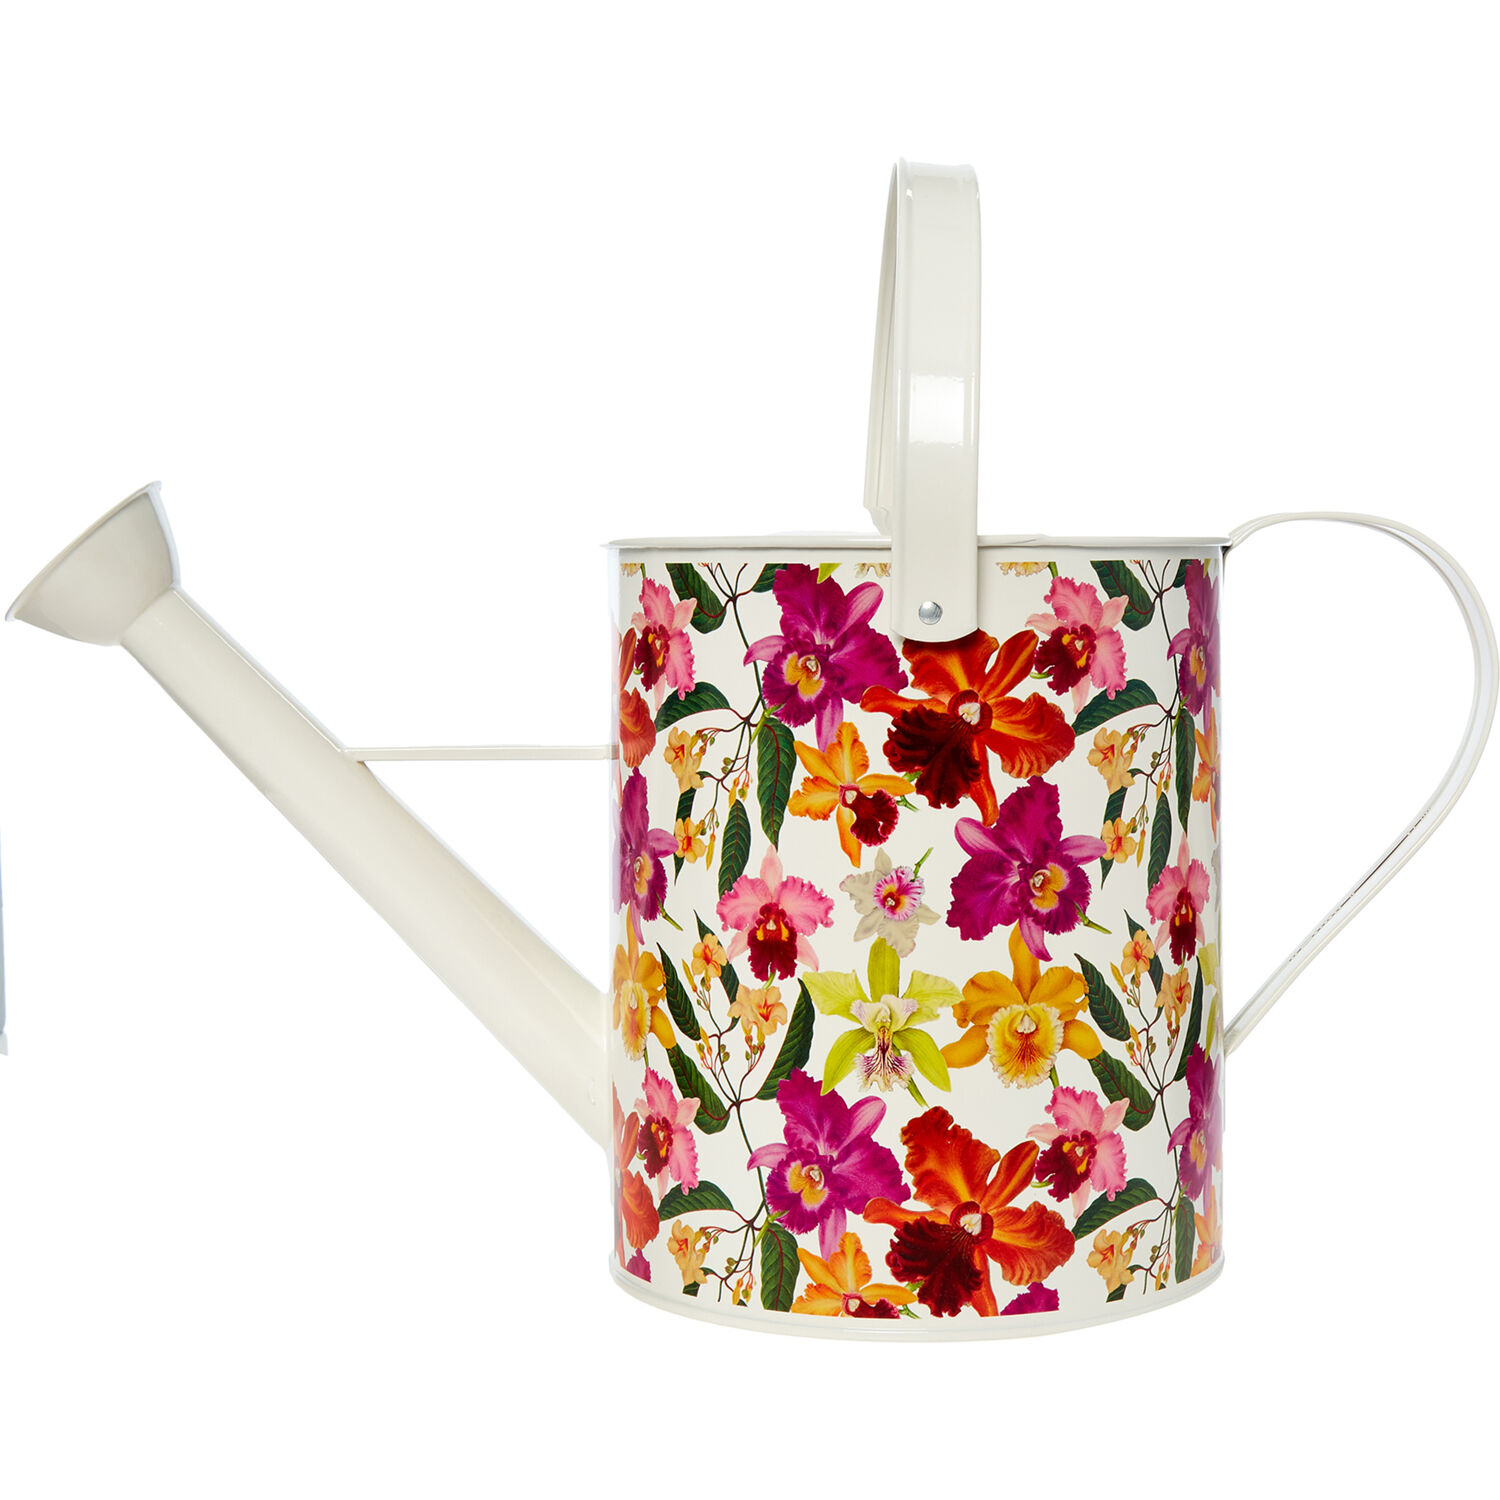 Friday Treat: Floral Watering Cans | British Beauty Blogger